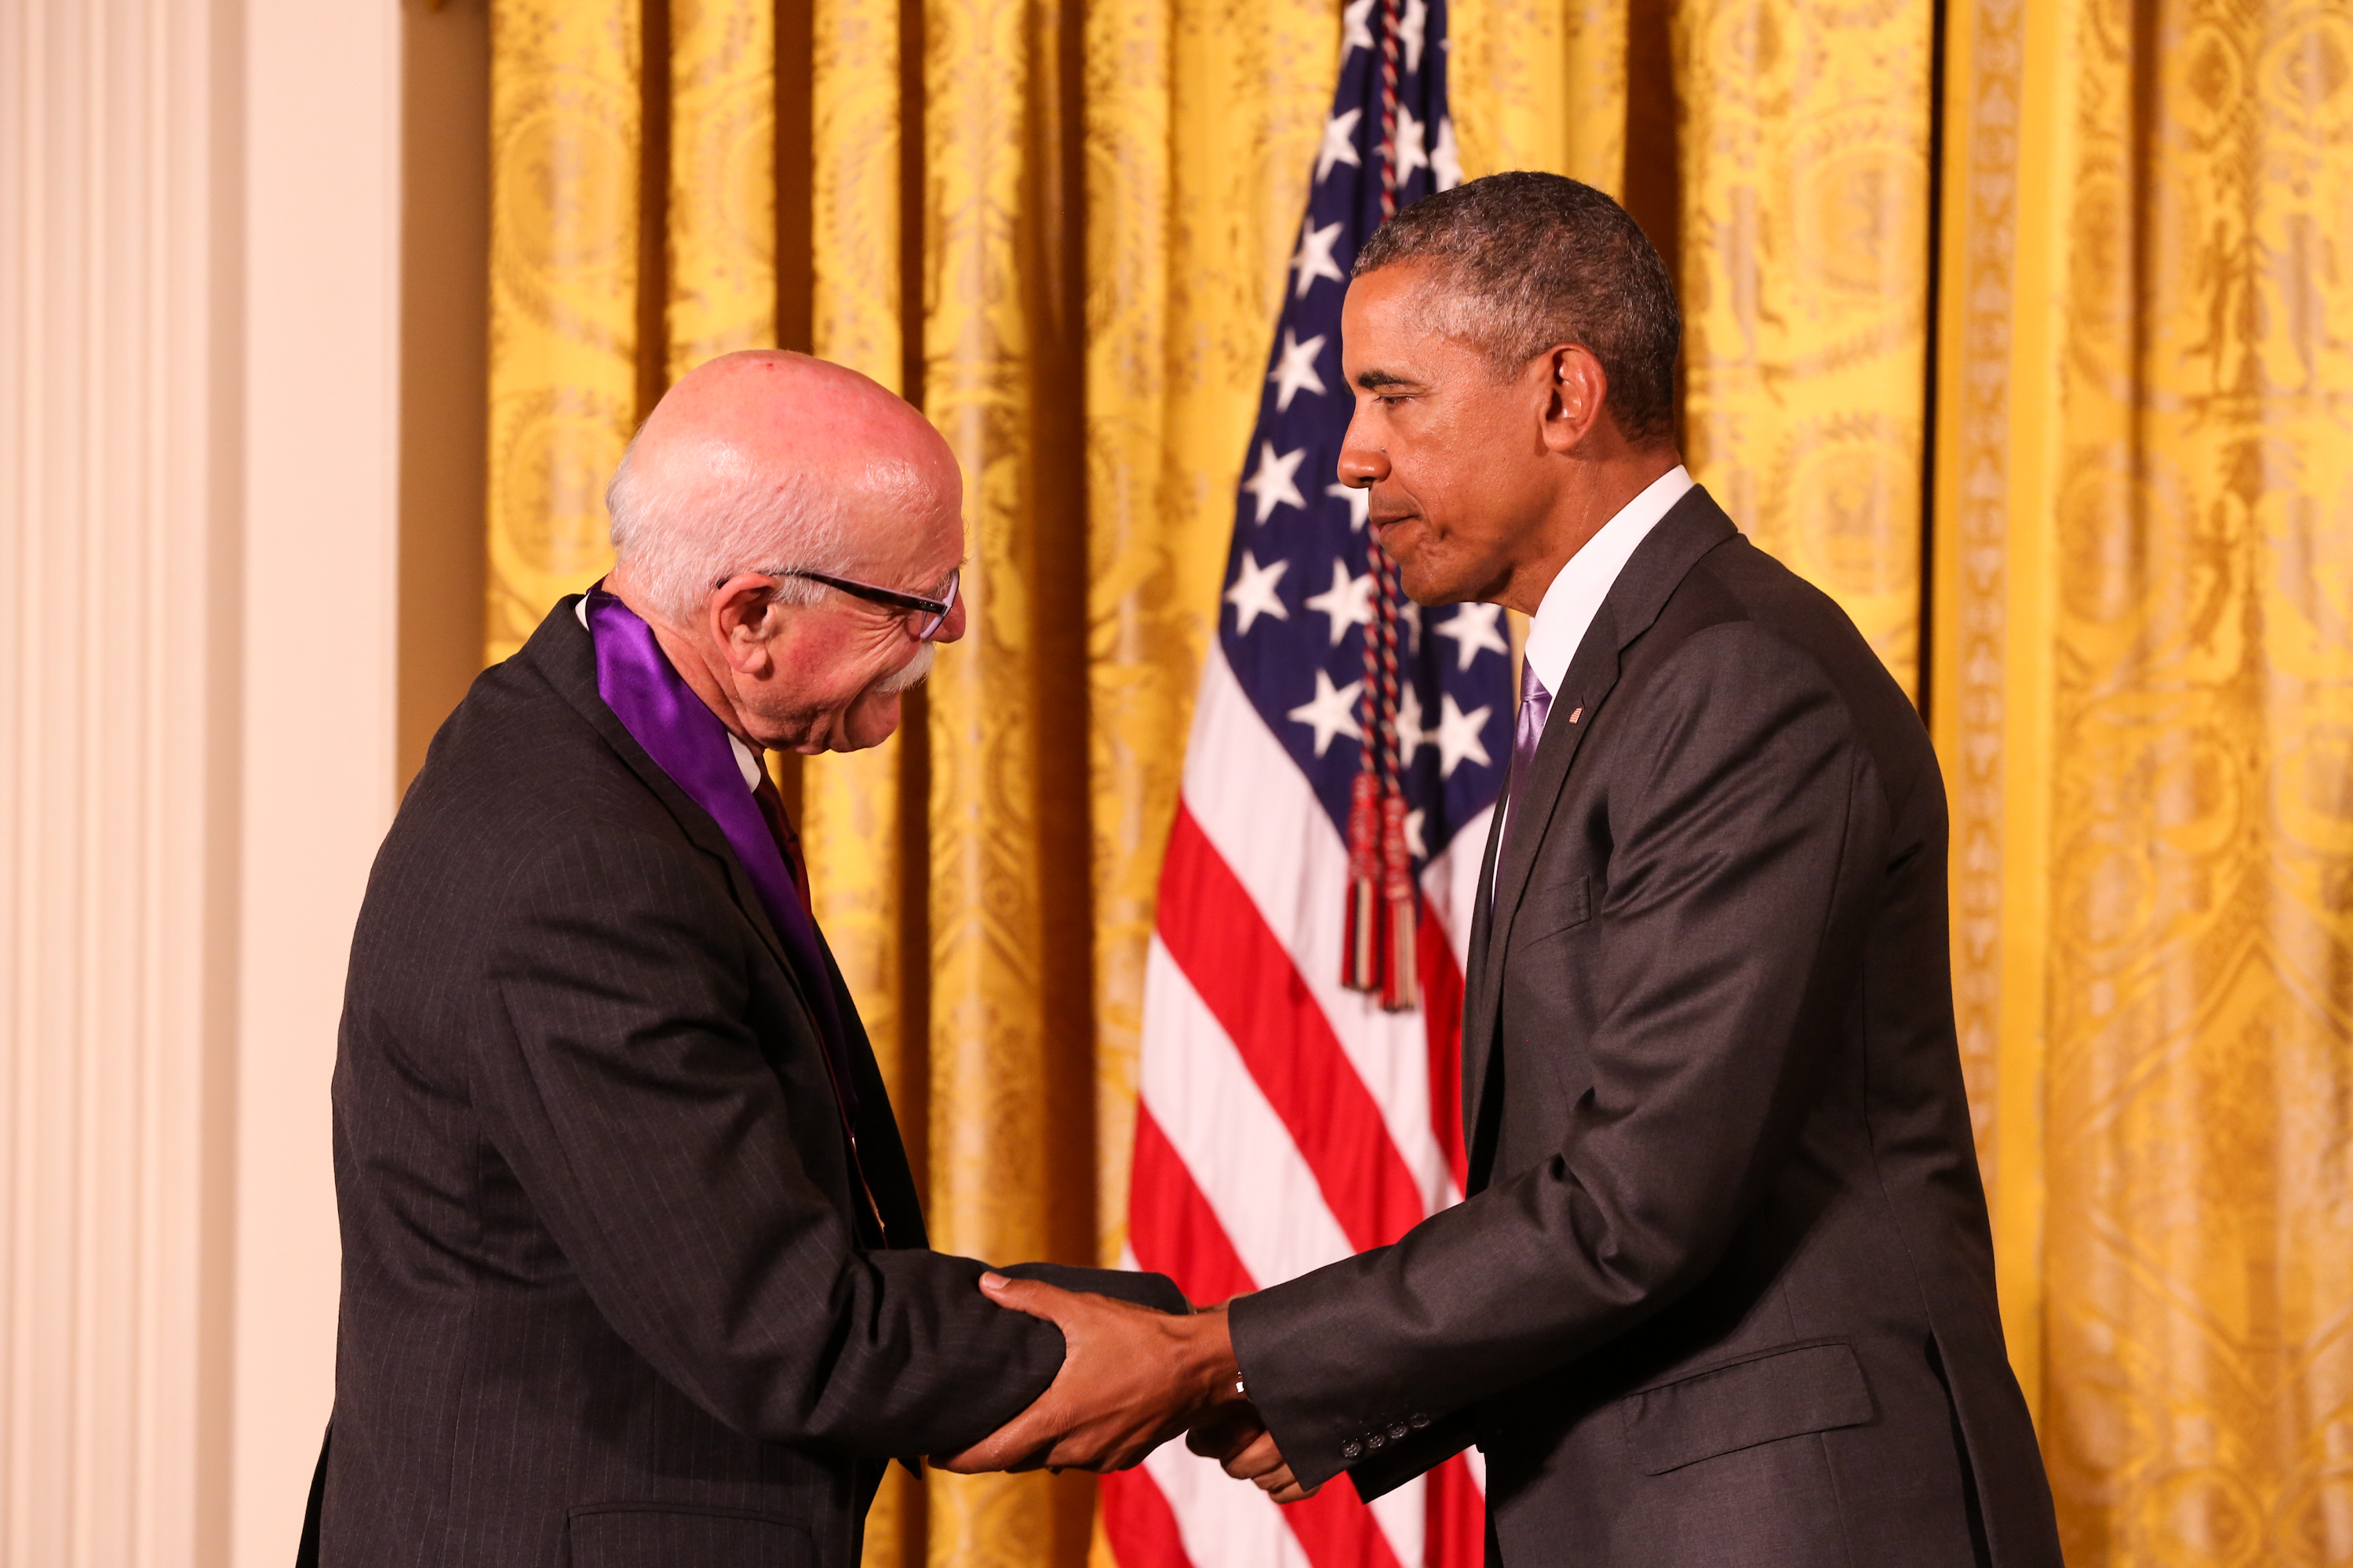 President Obama awards the 2014 National Medal of Arts to author Tobias Wolff.